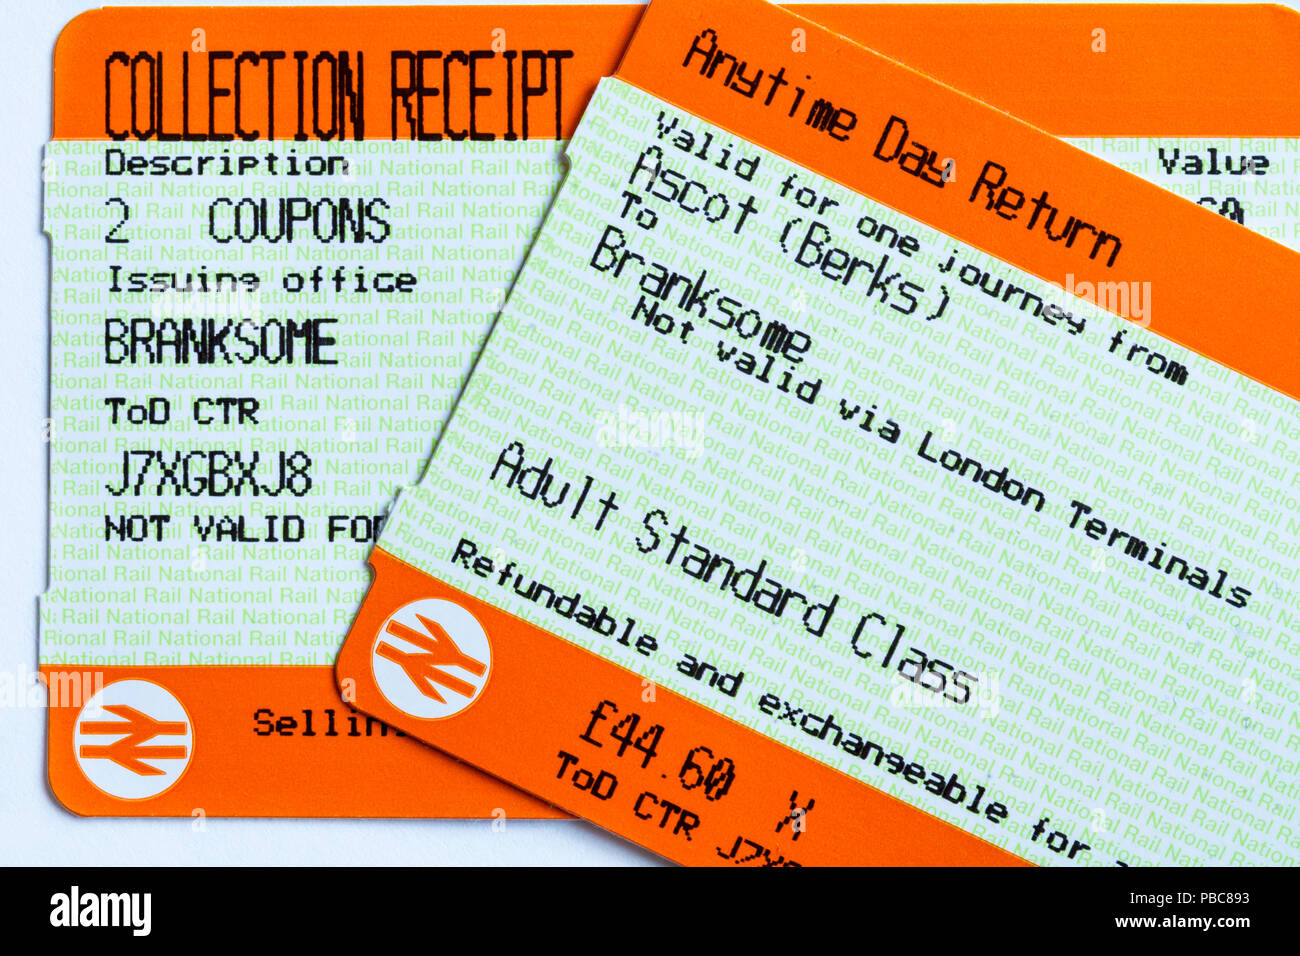 Anytime Day Return train ticket for travel between Ascot (Berks) and Branksome with Collection Receipt Stock Photo